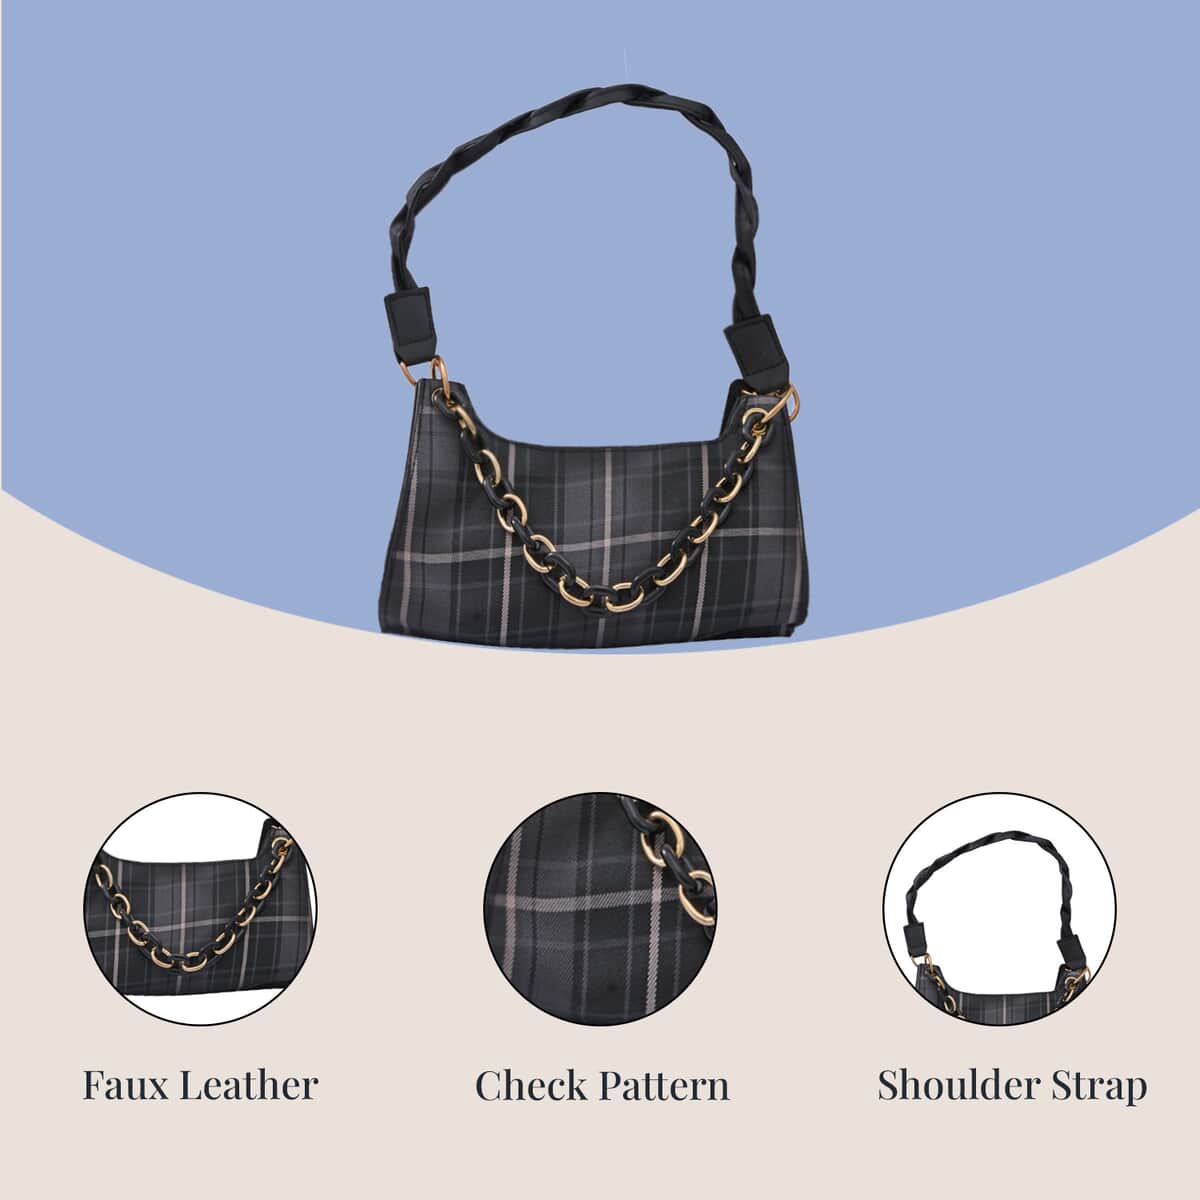 ROYAL SIAMESE Black Color Check Pattern Faux Leather Mini Handbag (3.72"x2.01"x1.08") with Handle Drop and Shoulder Strap image number 2